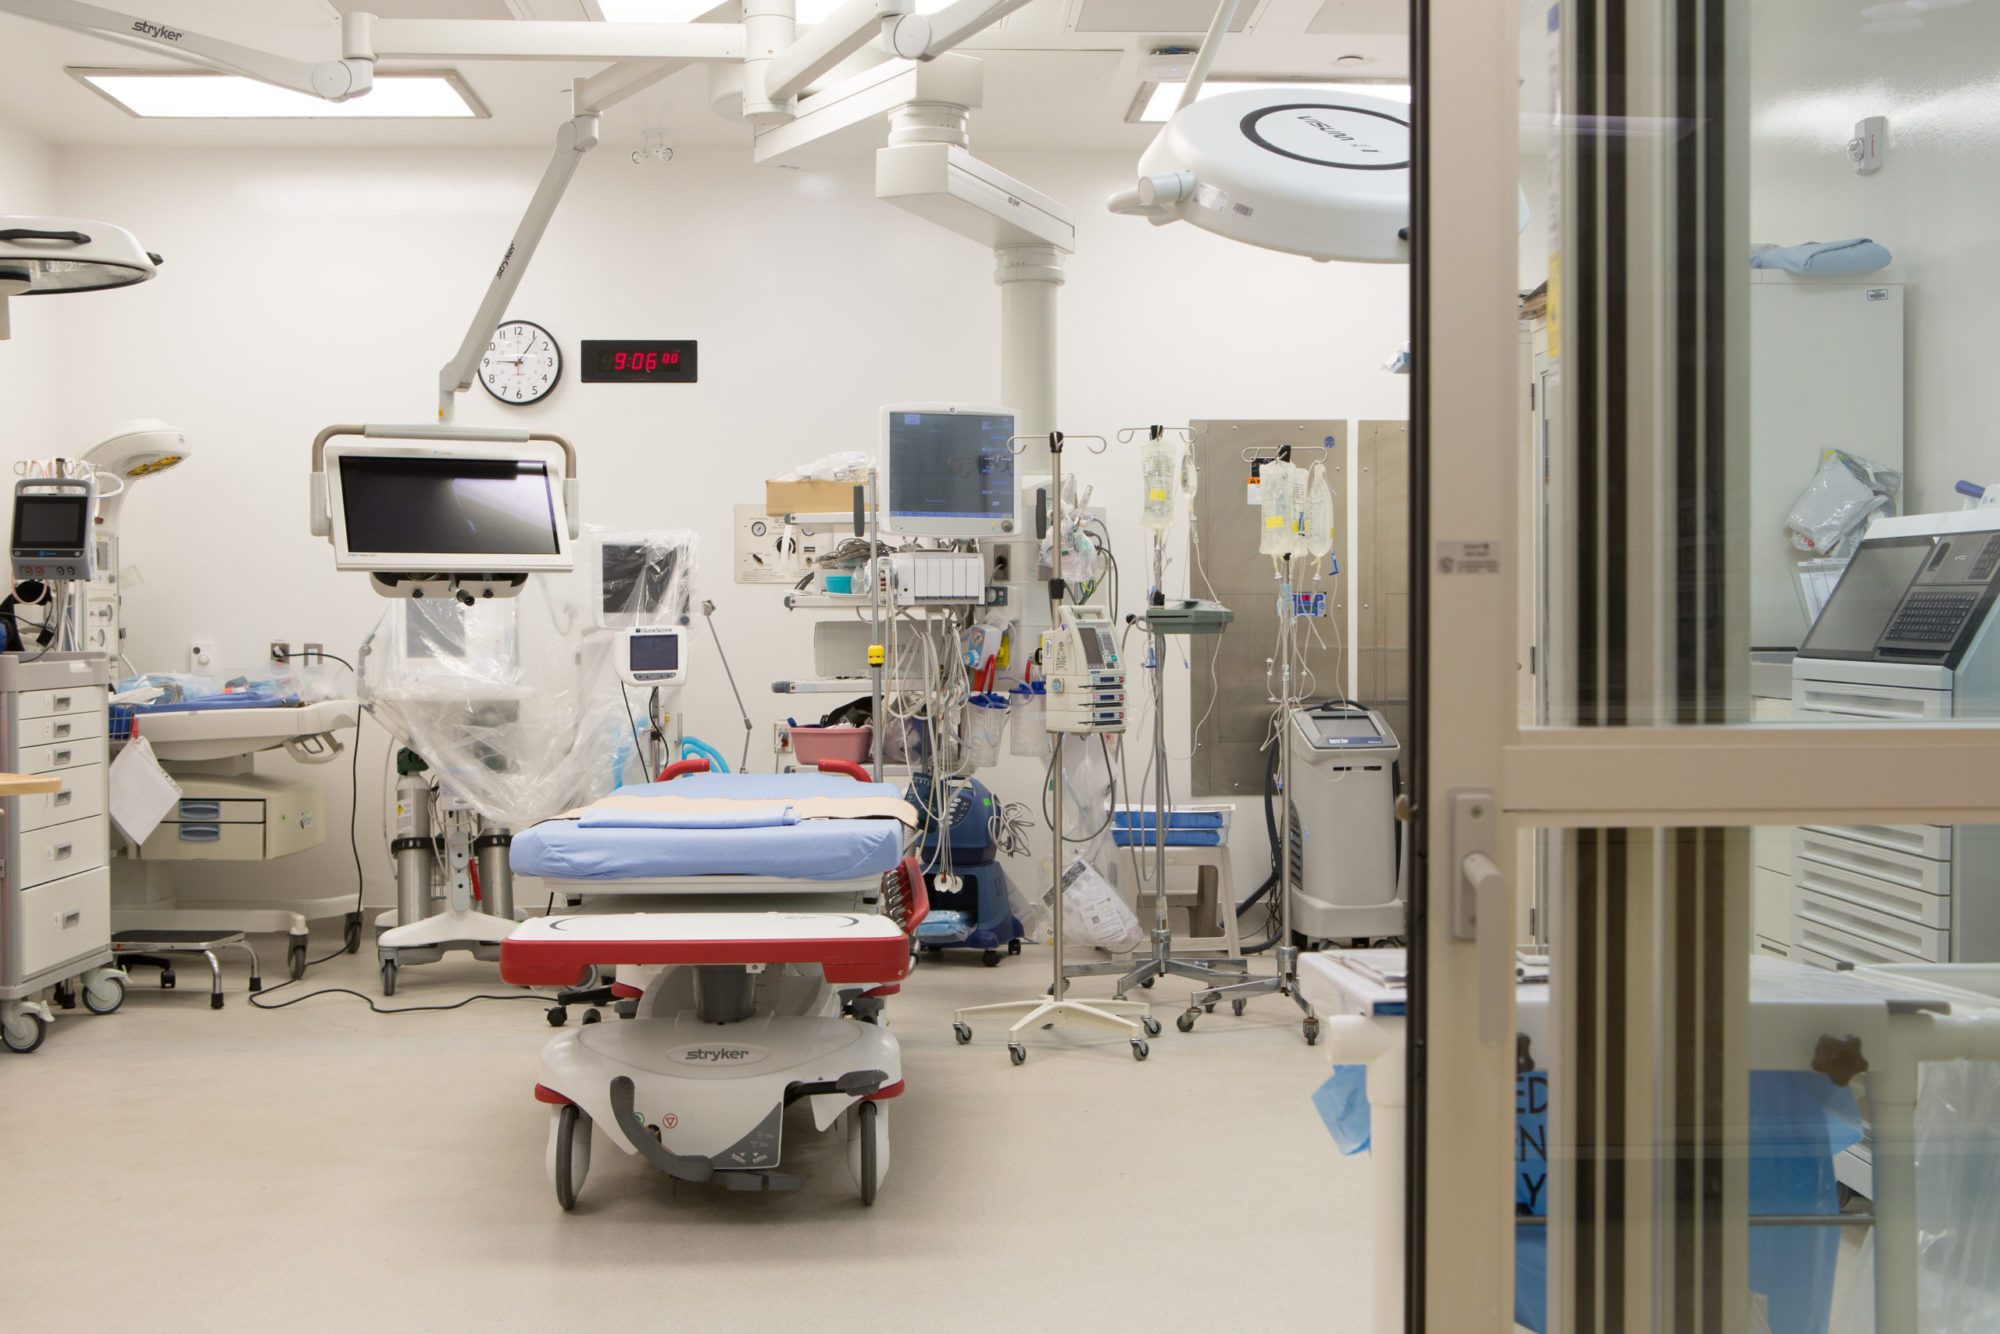 A picture of a negative pressure room in Humber River Hospital's Emergency Department. The room has a stretcher and lots of equipment, and the glass doors are sliding shut.